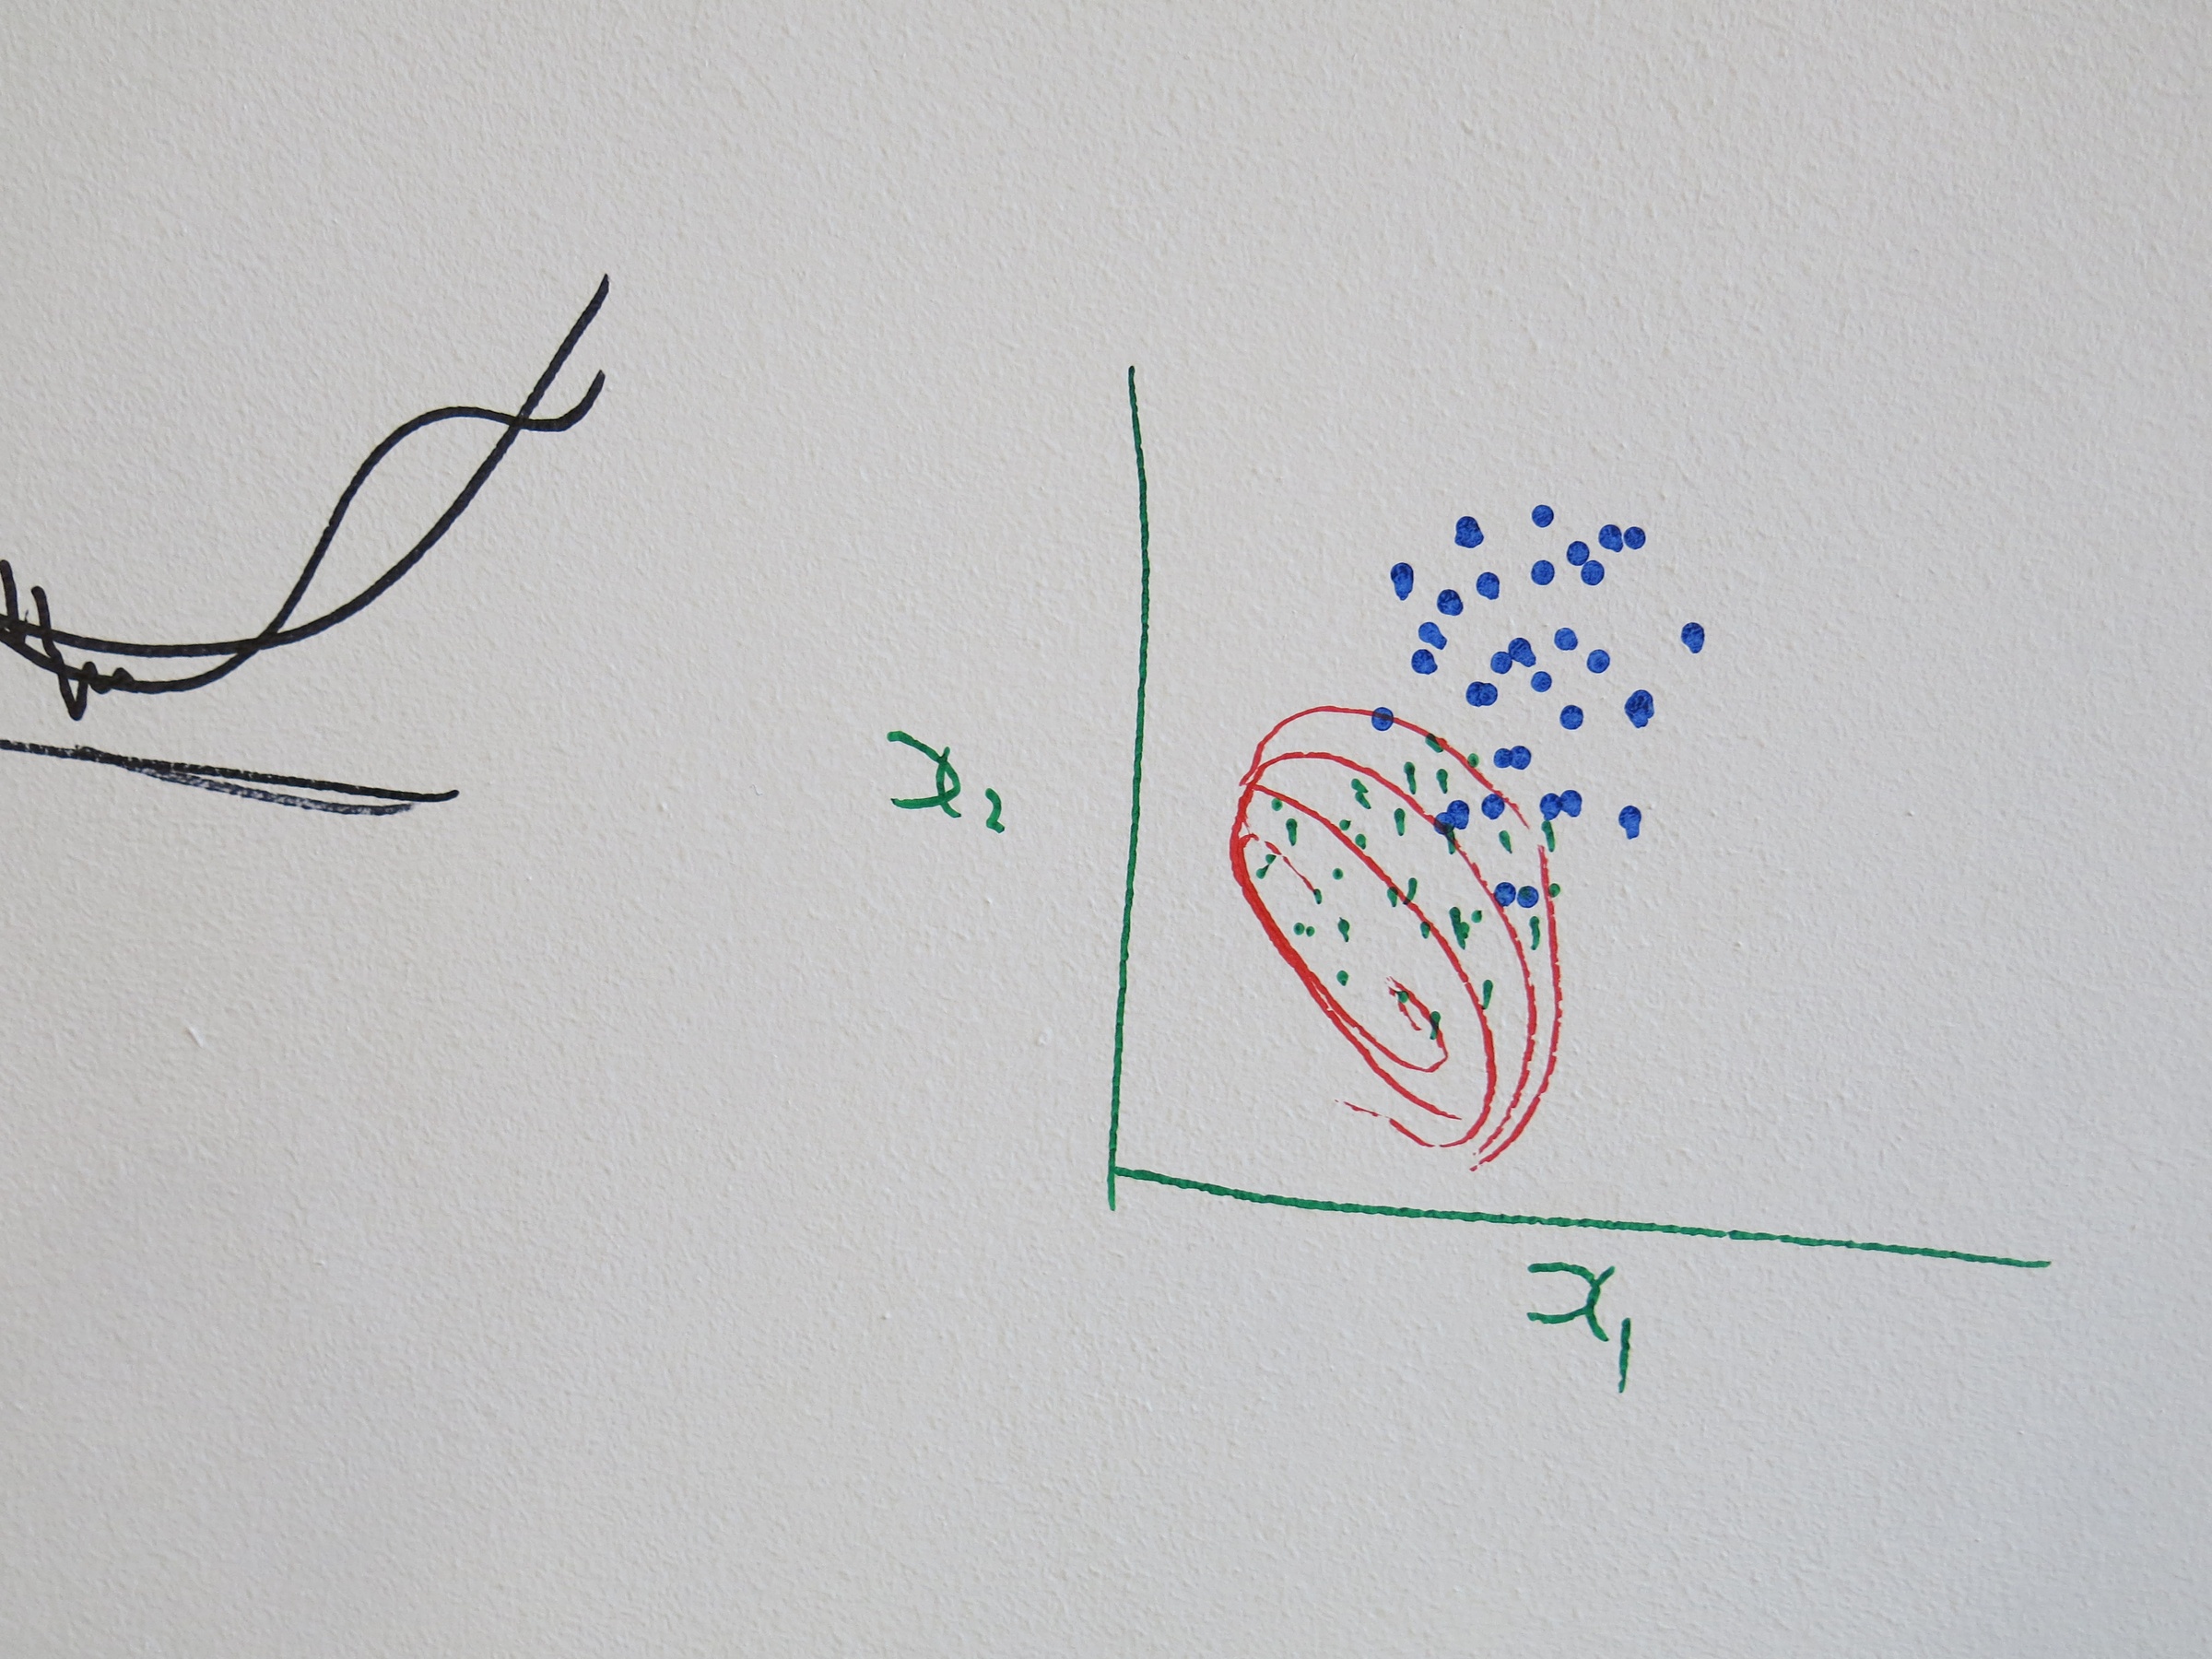 Event photograph from the ‘Artificial Intelligence JEDI’ workshop on A4’s top floor shows a graph diagram in green, red and blue felt pen marker on a white a wall.
